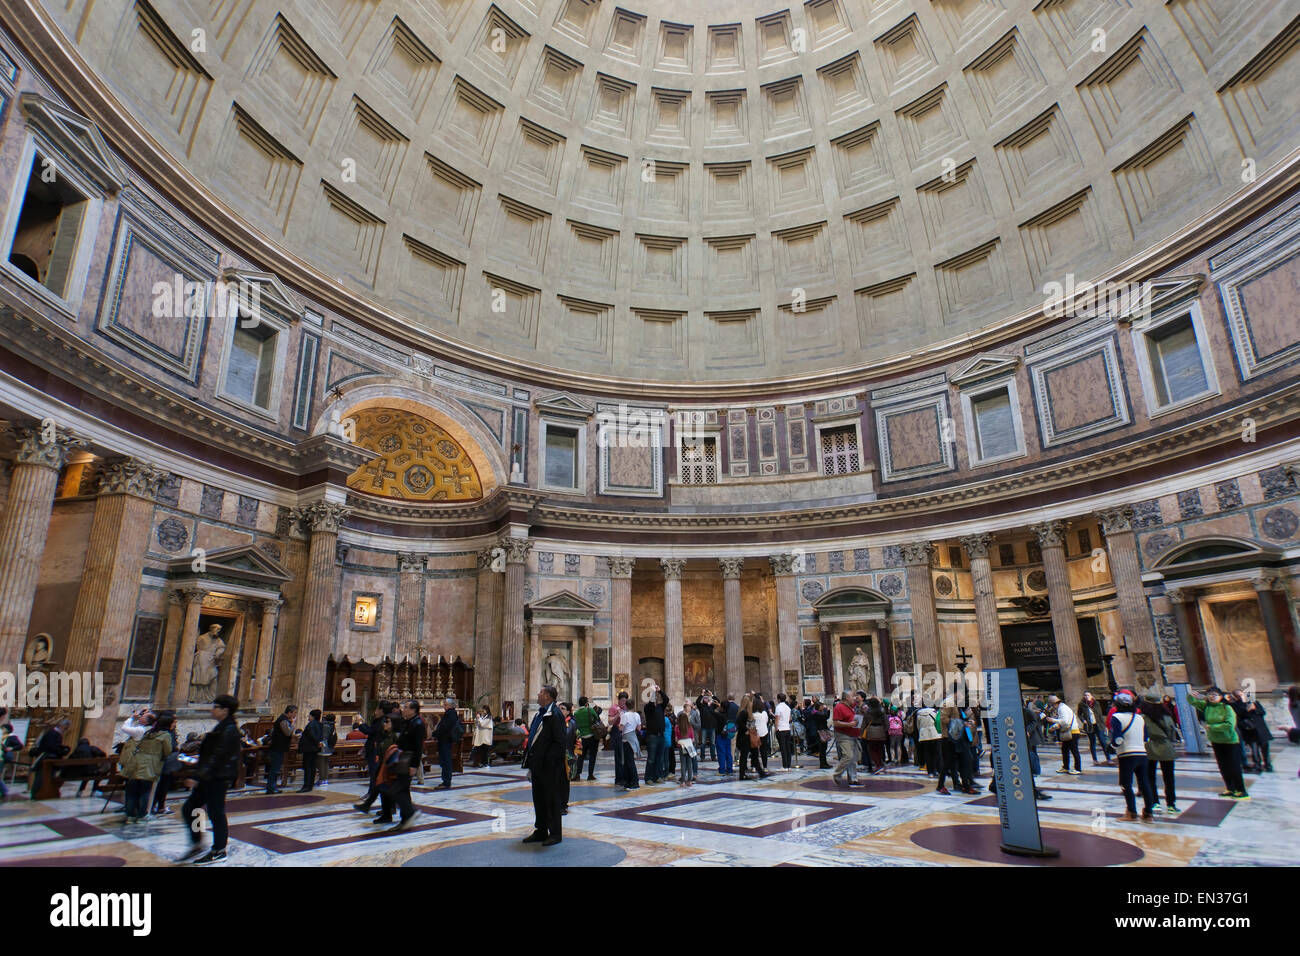 Inside the Pantheon, Rome, Italy Stock Photo